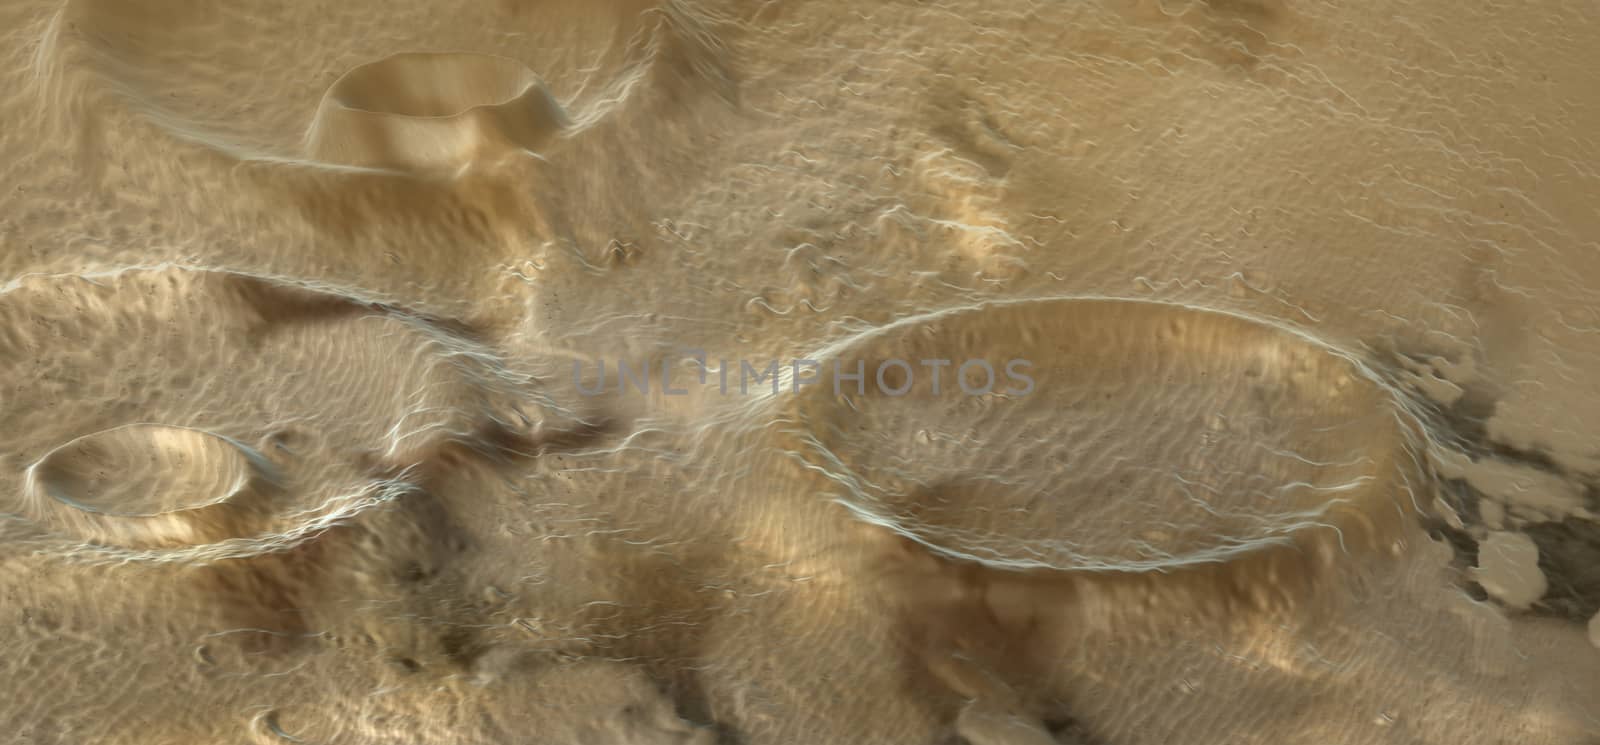 alien terrain with craters made in 3d software